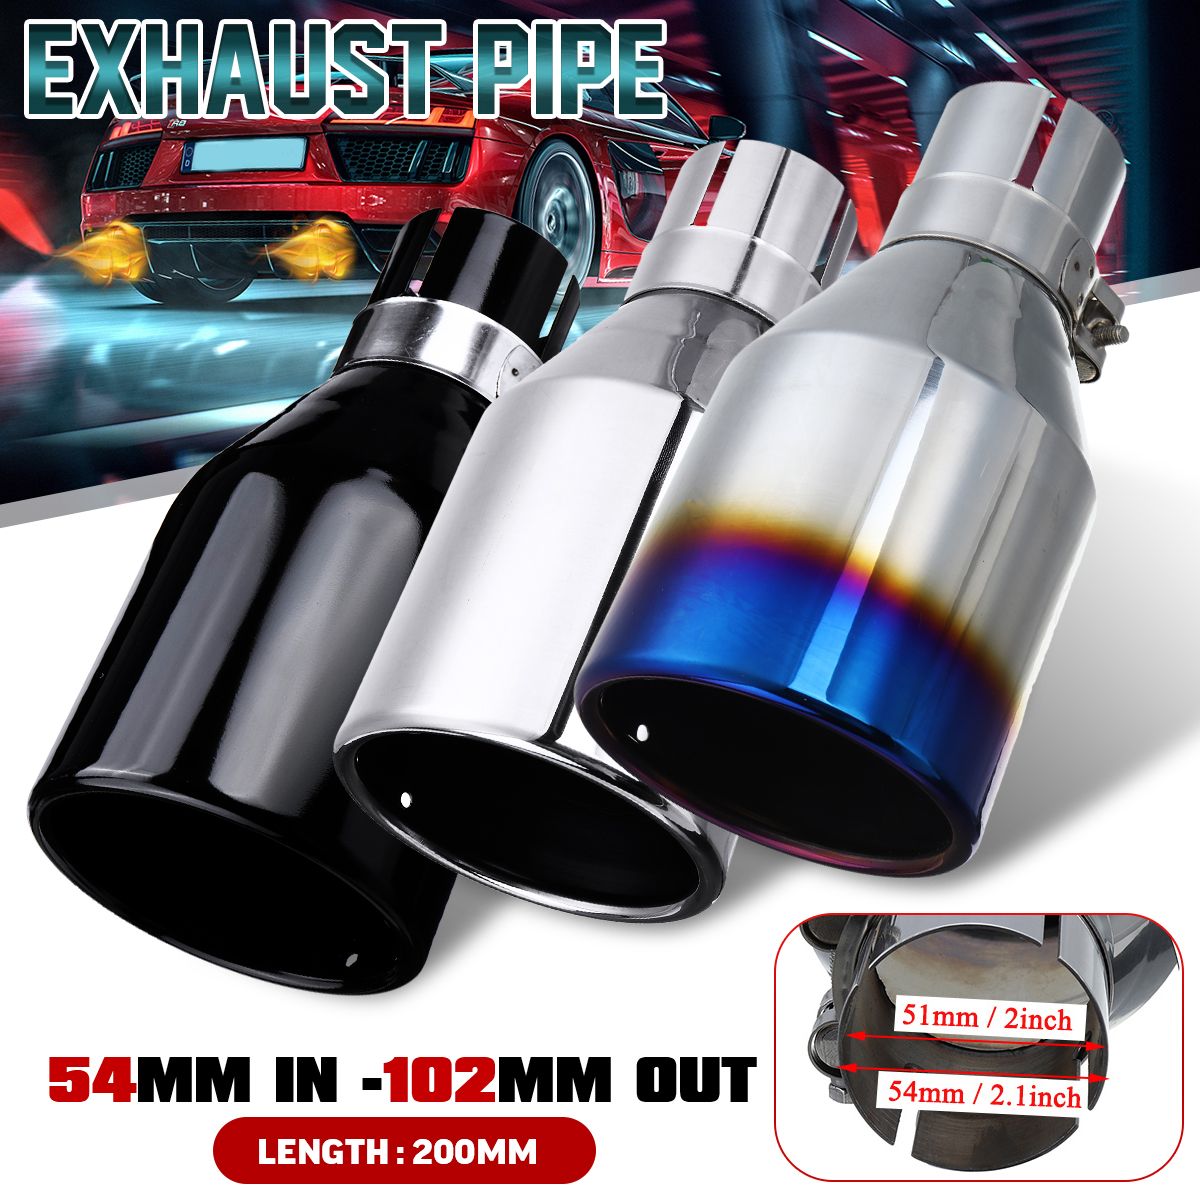 Universal-54MM-Inlet-102MM-Outlet-Stainless-Steel-Car-Rear-Exhaust-Tip-Pipe-Muffler-Adapter-Reducer--1681733